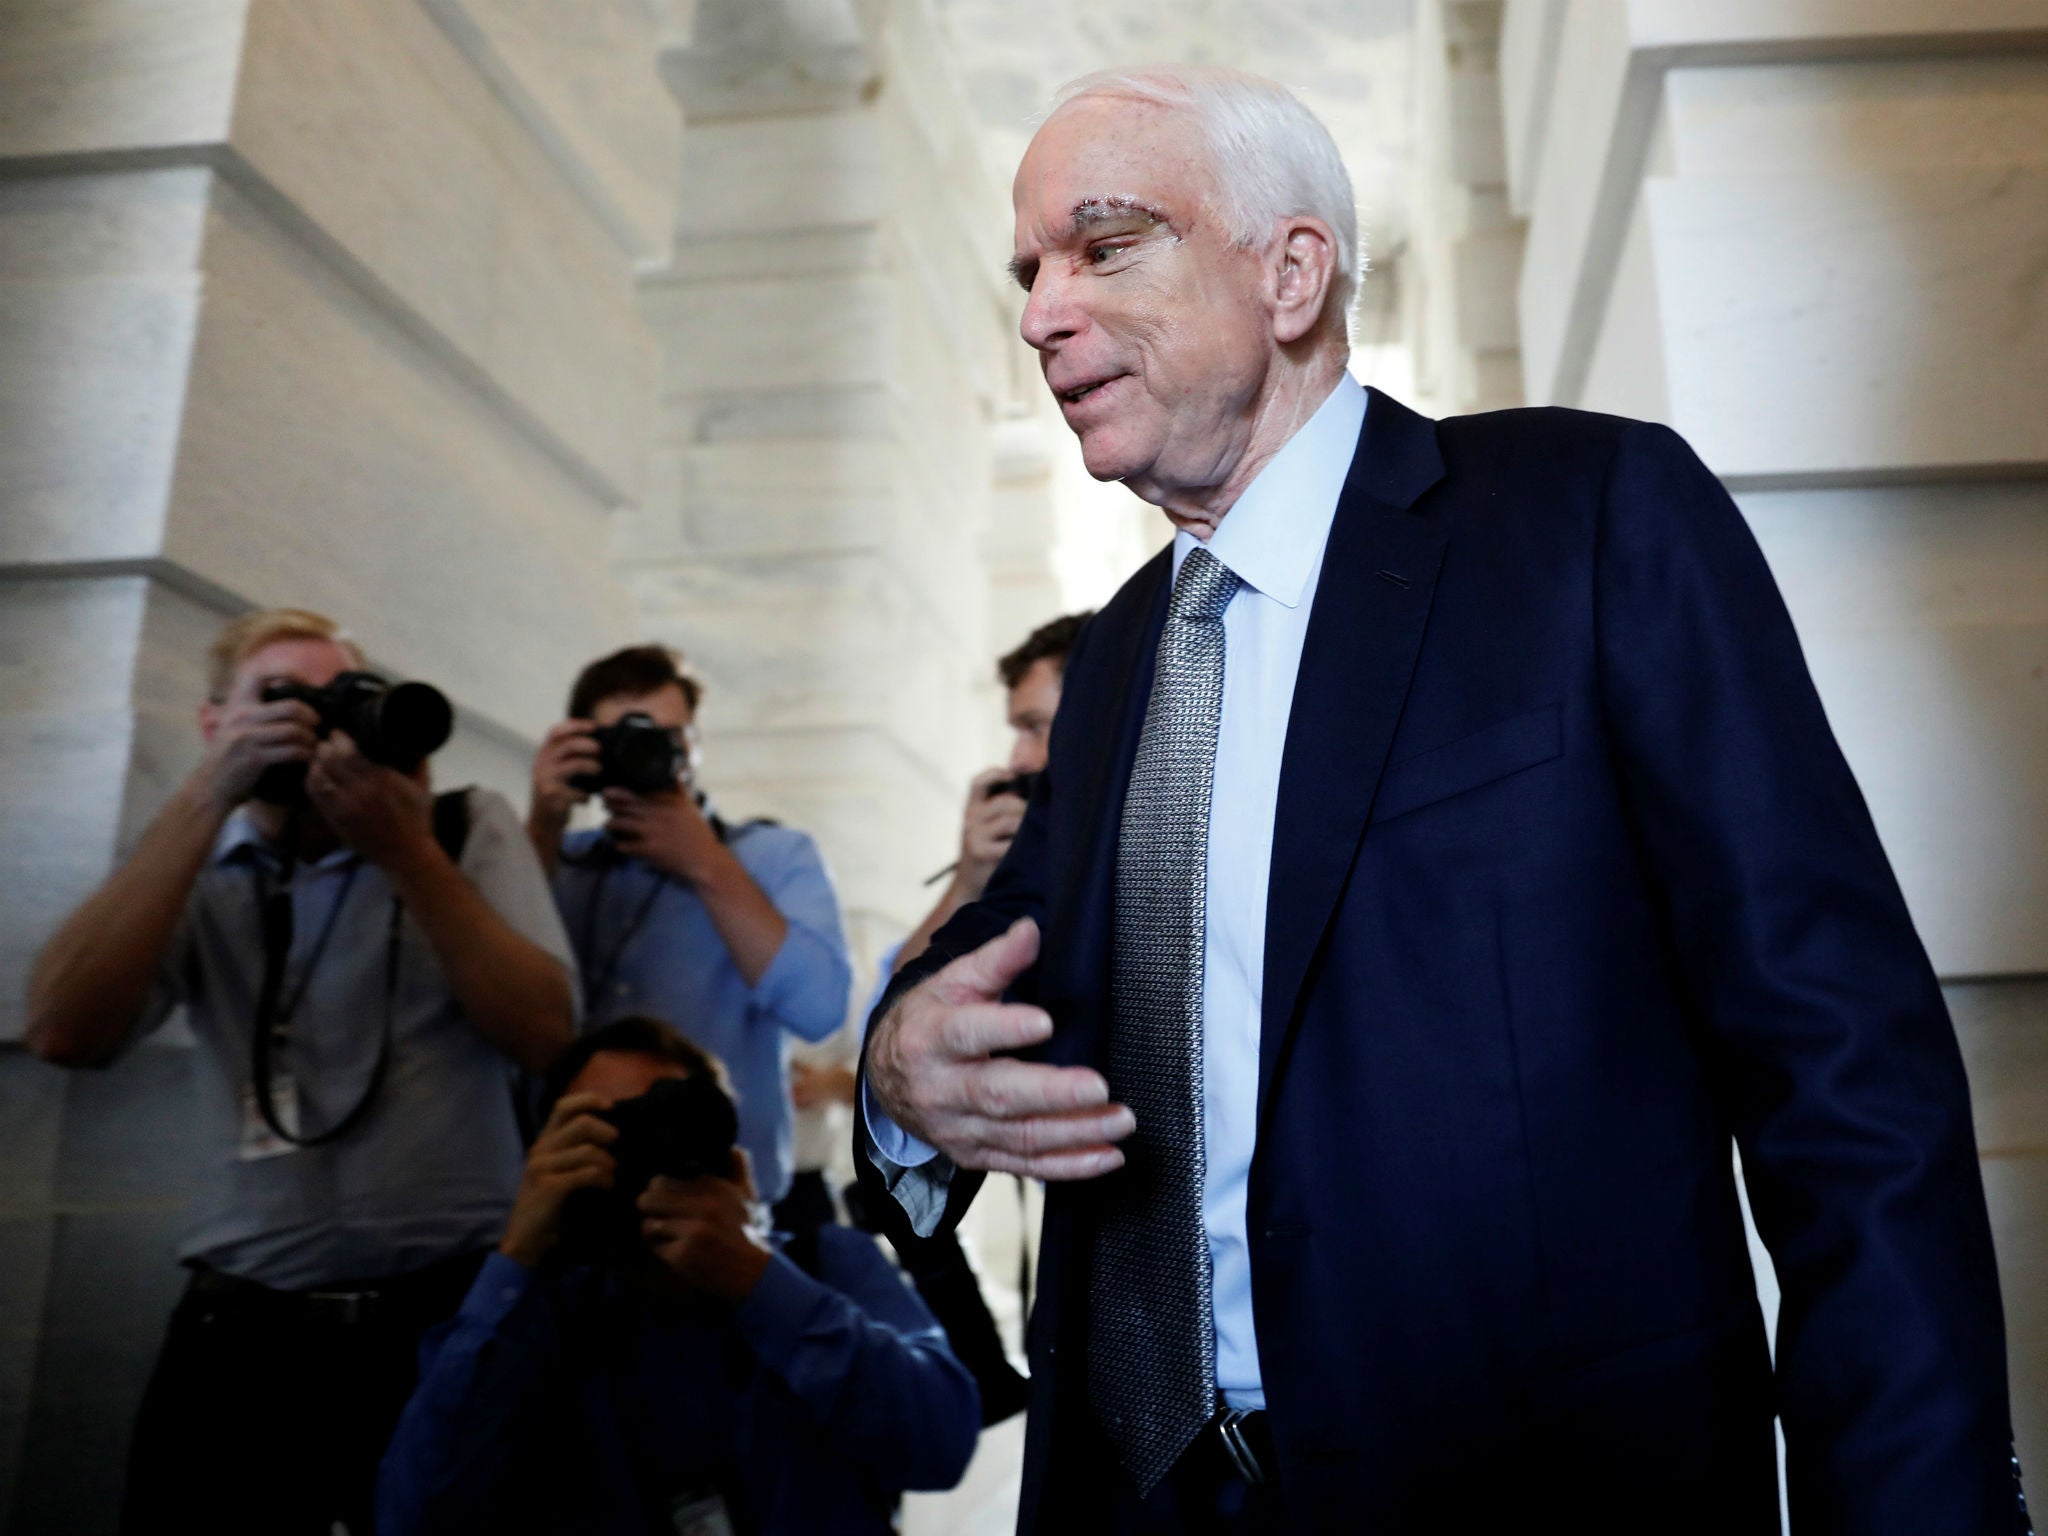 Senator John McCain, who had just been diagnosed with brain cancer, departs after returning to the Senate to vote on health care legislation in Washington on July 25, 2017